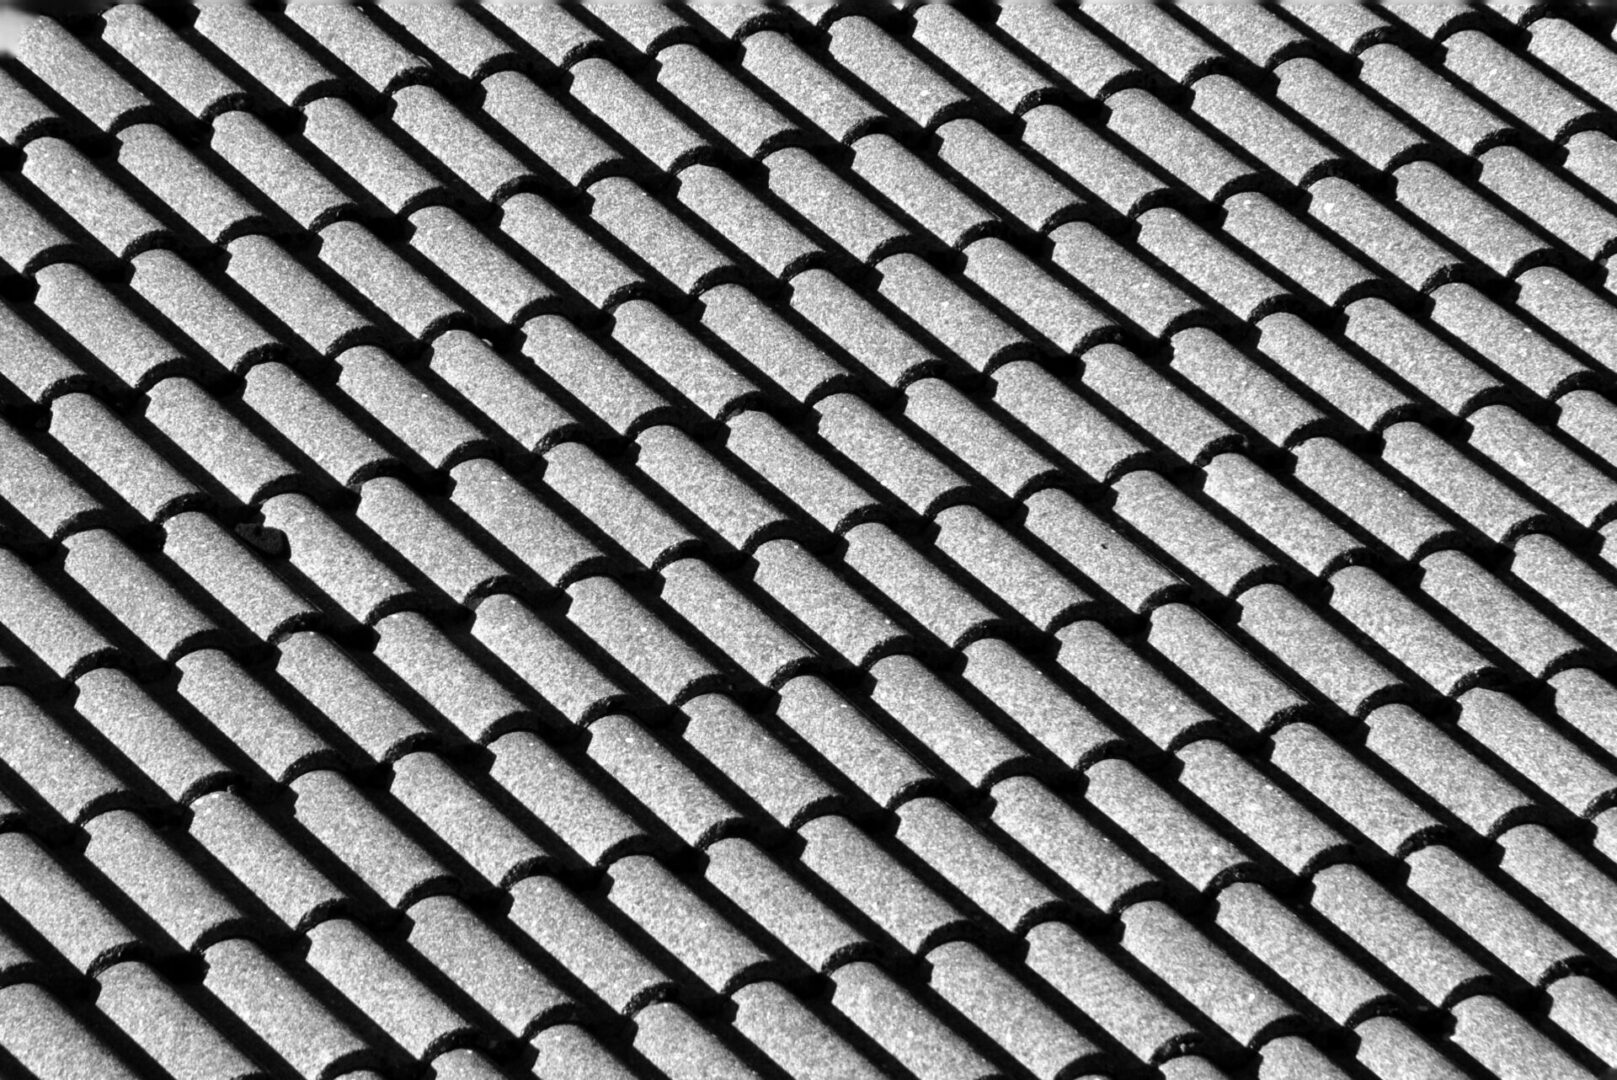 A close up of the roof tiles on a building.